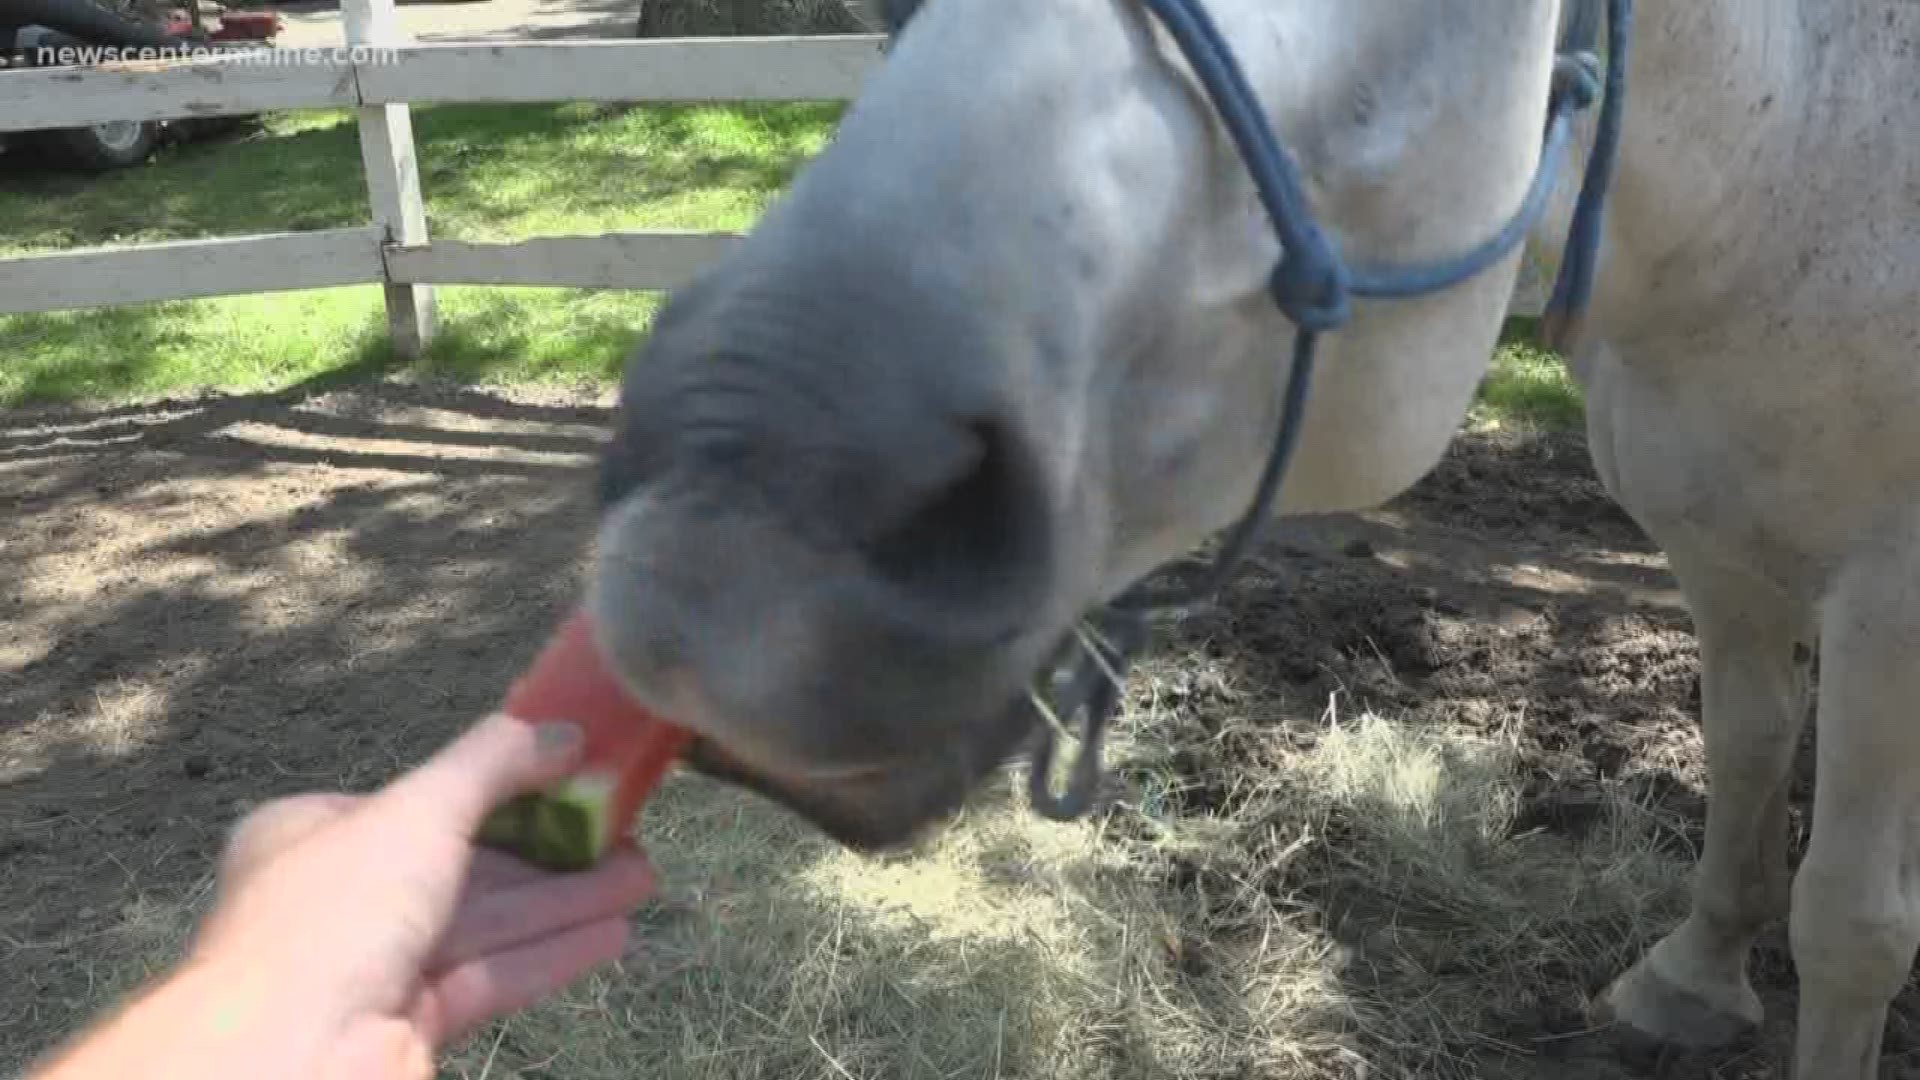 One way to keep your horses cool in the heat is by feeding them watermelon.